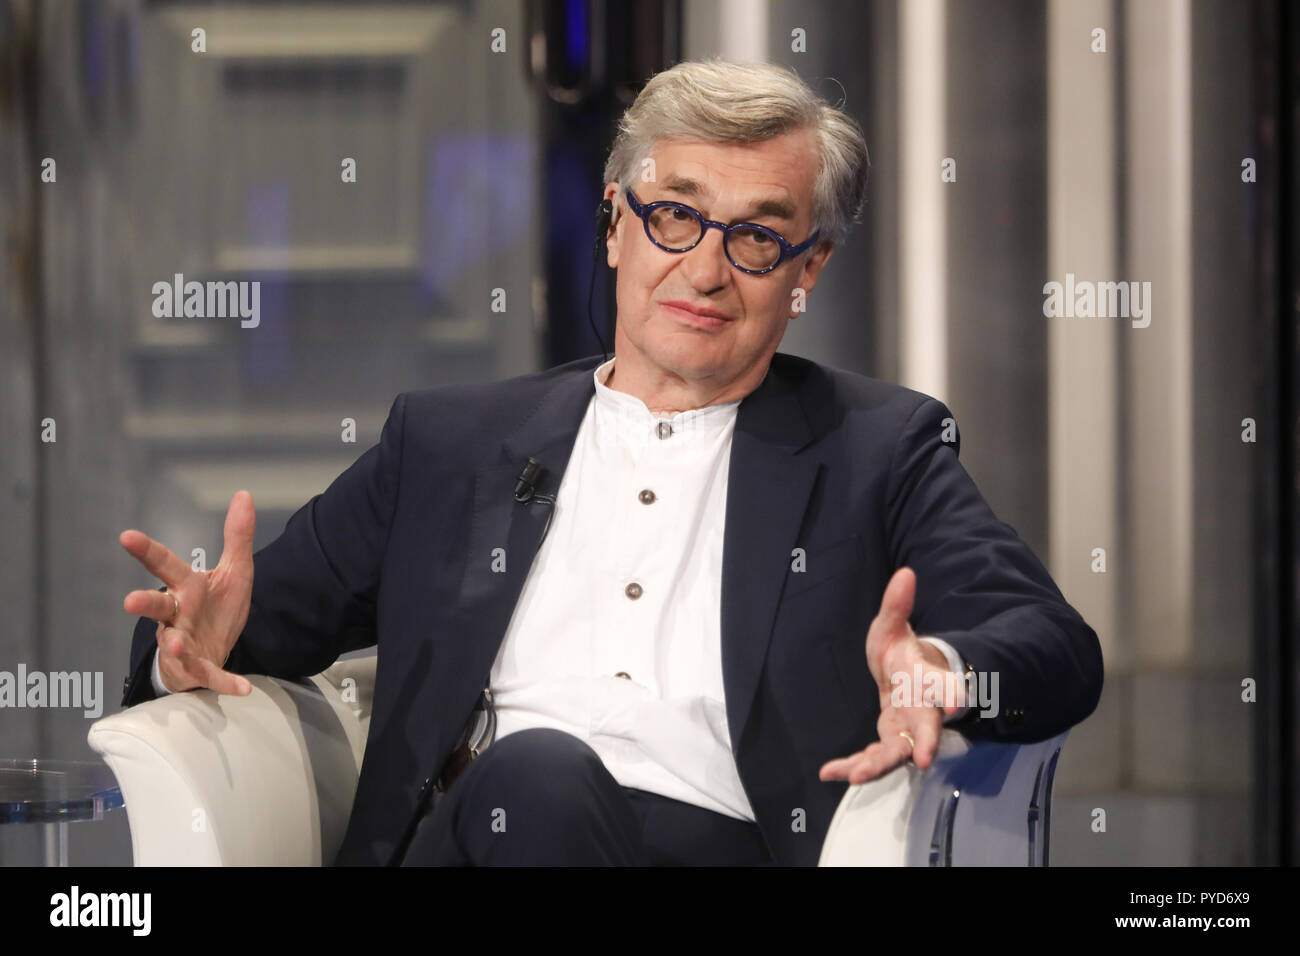 Rai Teulada Studies 'Porta a Porta' TV broadcast  Featuring: Wim Wenders Where: Rome, Italy When: 25 Sep 2018 Credit: IPA/WENN.com  **Only available for publication in UK, USA, Germany, Austria, Switzerland** Stock Photo